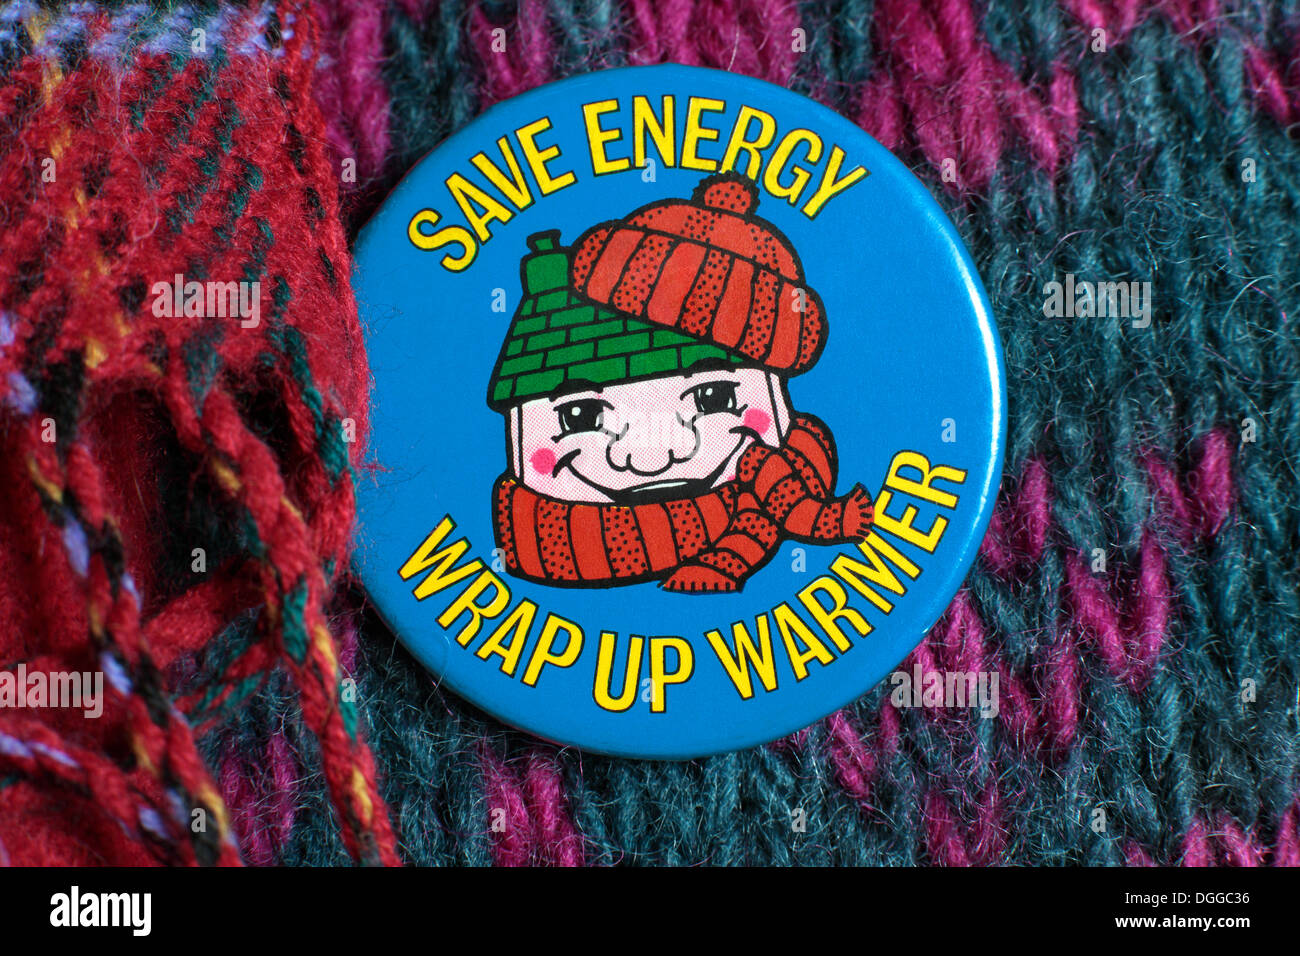 'Save Energy - Wrap up Warmer' - an energy conservation badge from around 1980  produced by a British government department or a related quango. Stock Photo